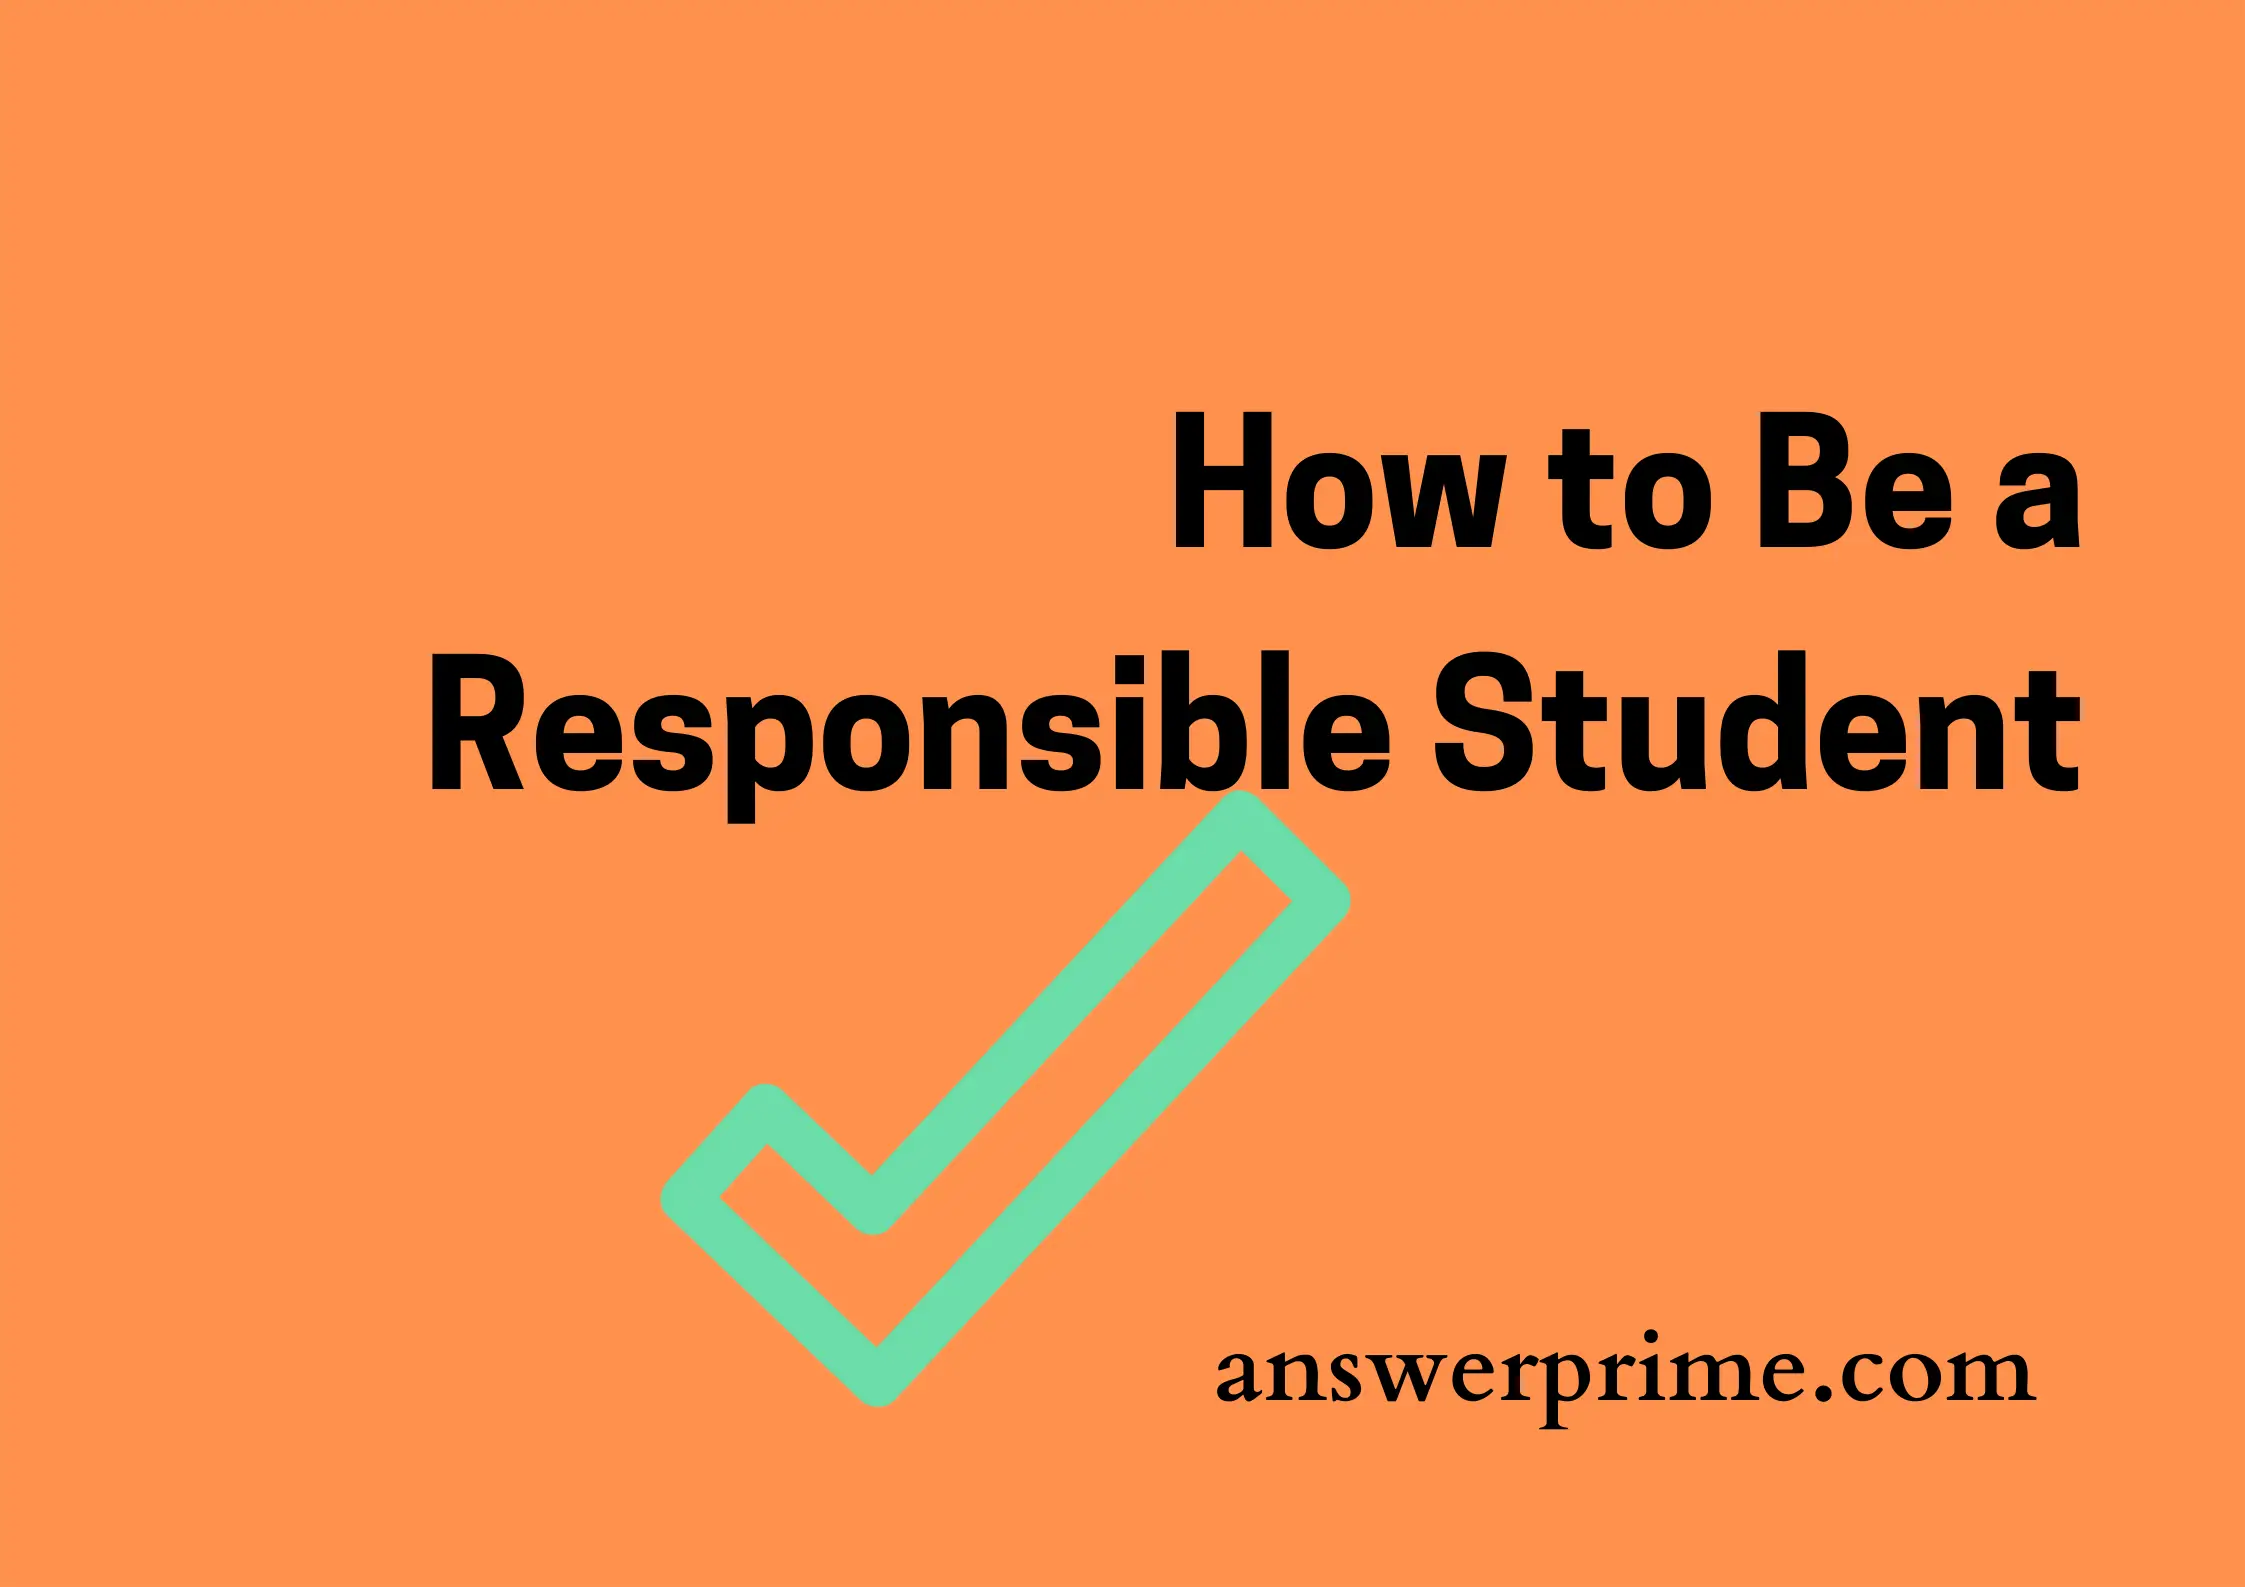 How to Be a Responsible Student